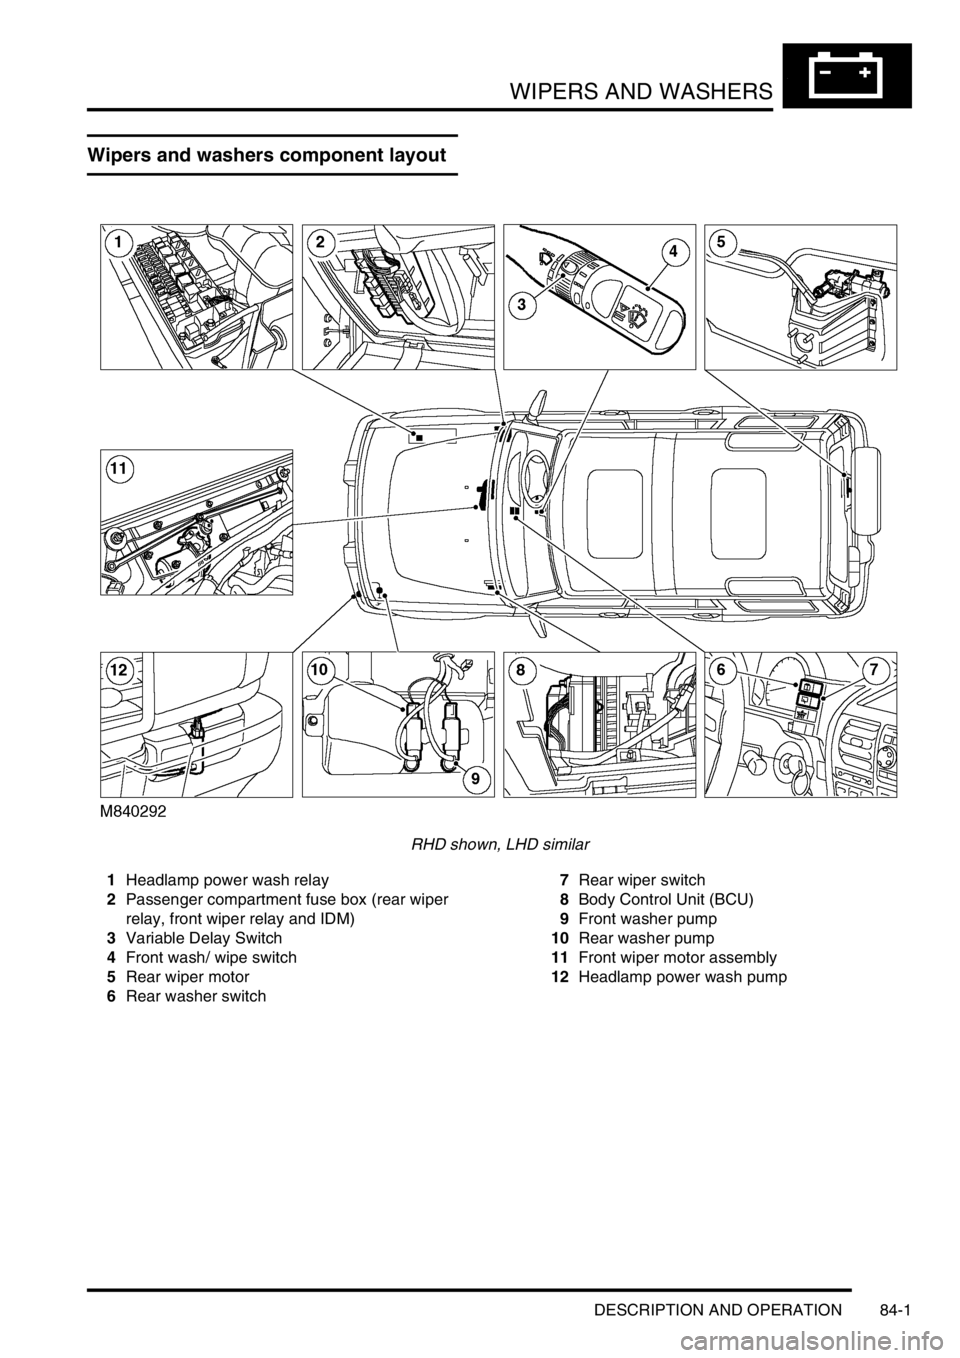 LAND ROVER DISCOVERY 2002  Workshop Manual WIPERS AND WASHERS
DESCRIPTION AND OPERATION 84-1
WIPERS AND WASHERS DESCRIPTION AND  OPERAT ION
Wipers and washers component layout
RHD shown, LHD similar
1Headlamp power wash relay
2Passenger compar